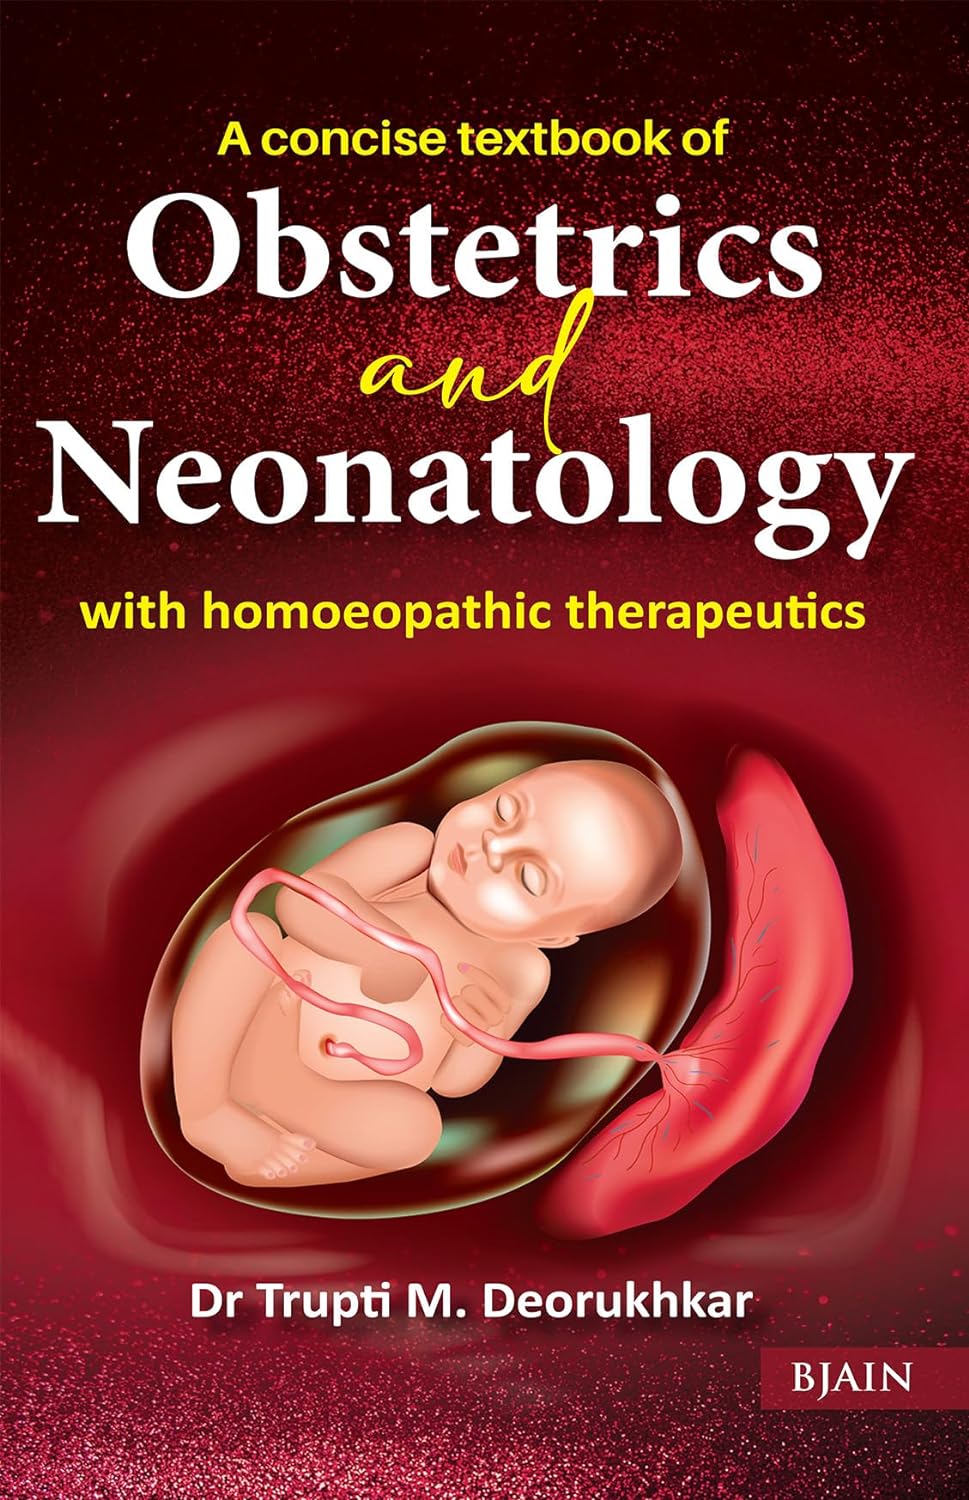 A Concise Textbook Of Obstetrics And Neonatology With Homoeopathic Therapeutics